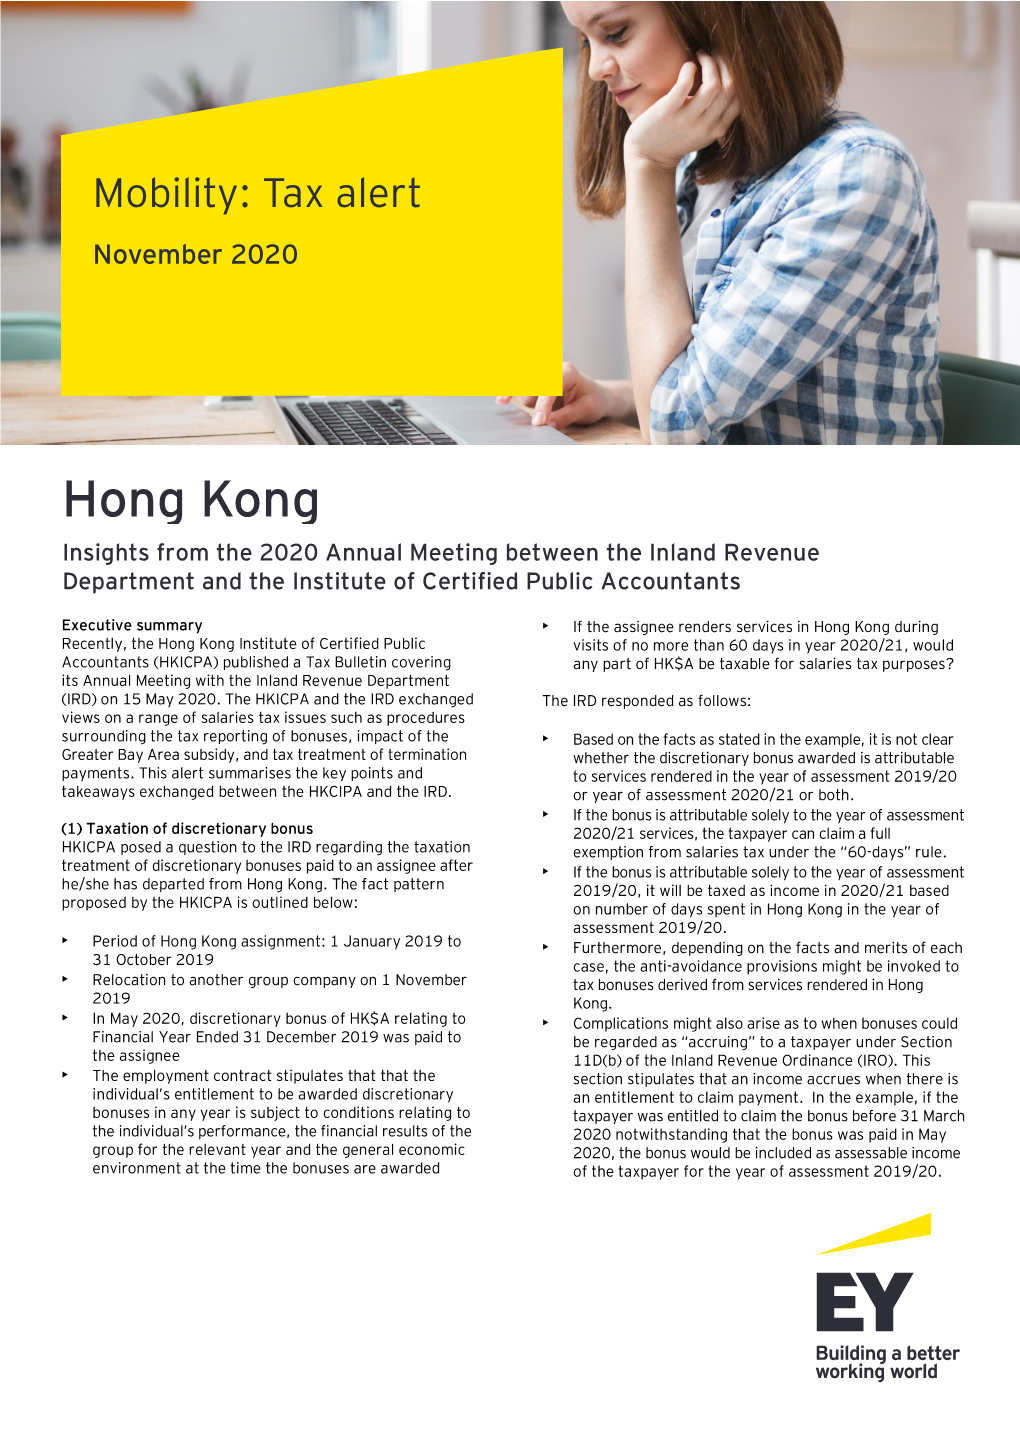 Hong Kong Insights from the 2020 Annual Meeting Between the Inland Revenue Department and the Institute of Certified Public Accountants